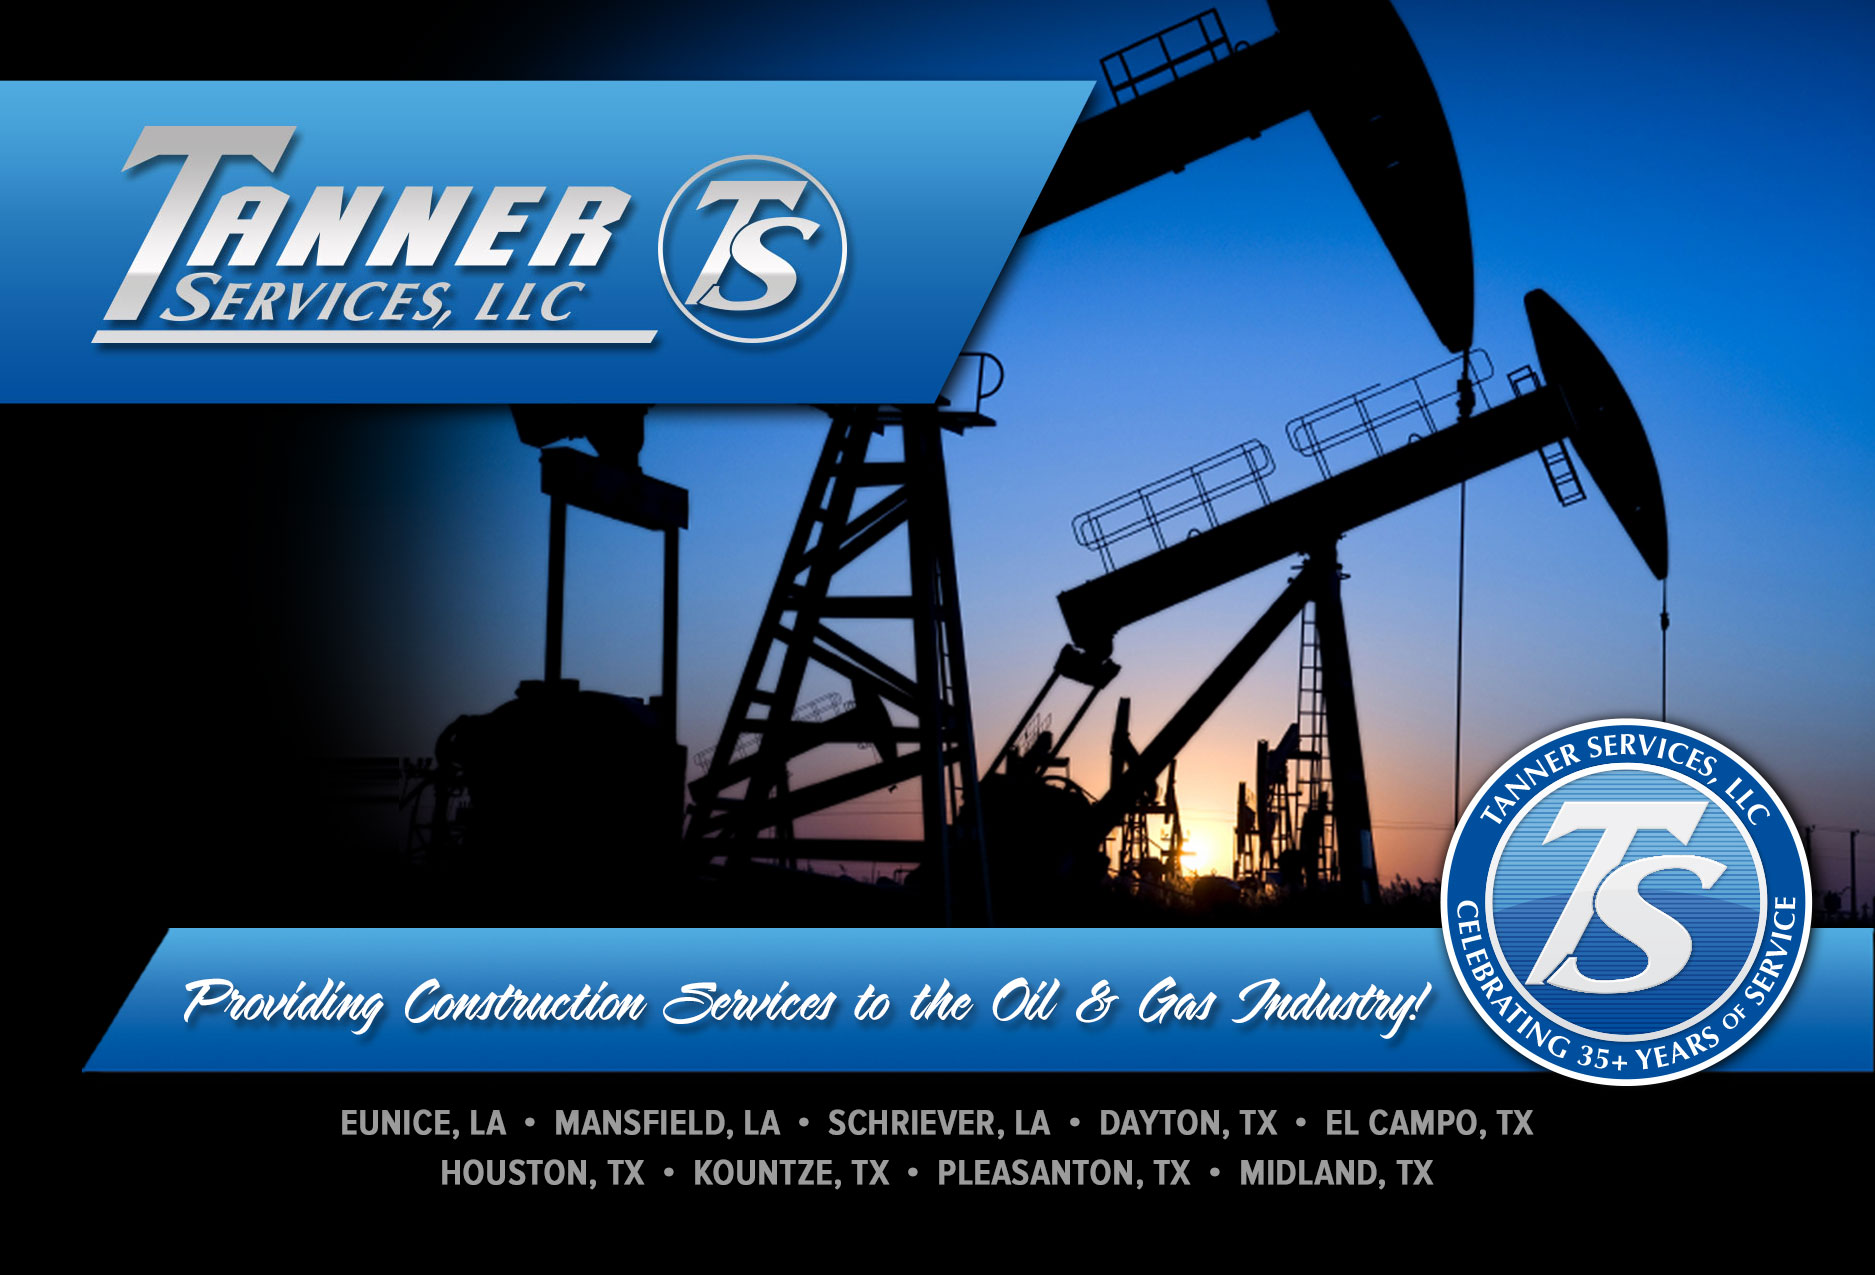 Tanner Services Service the Gulf Coast for Over 35 Years